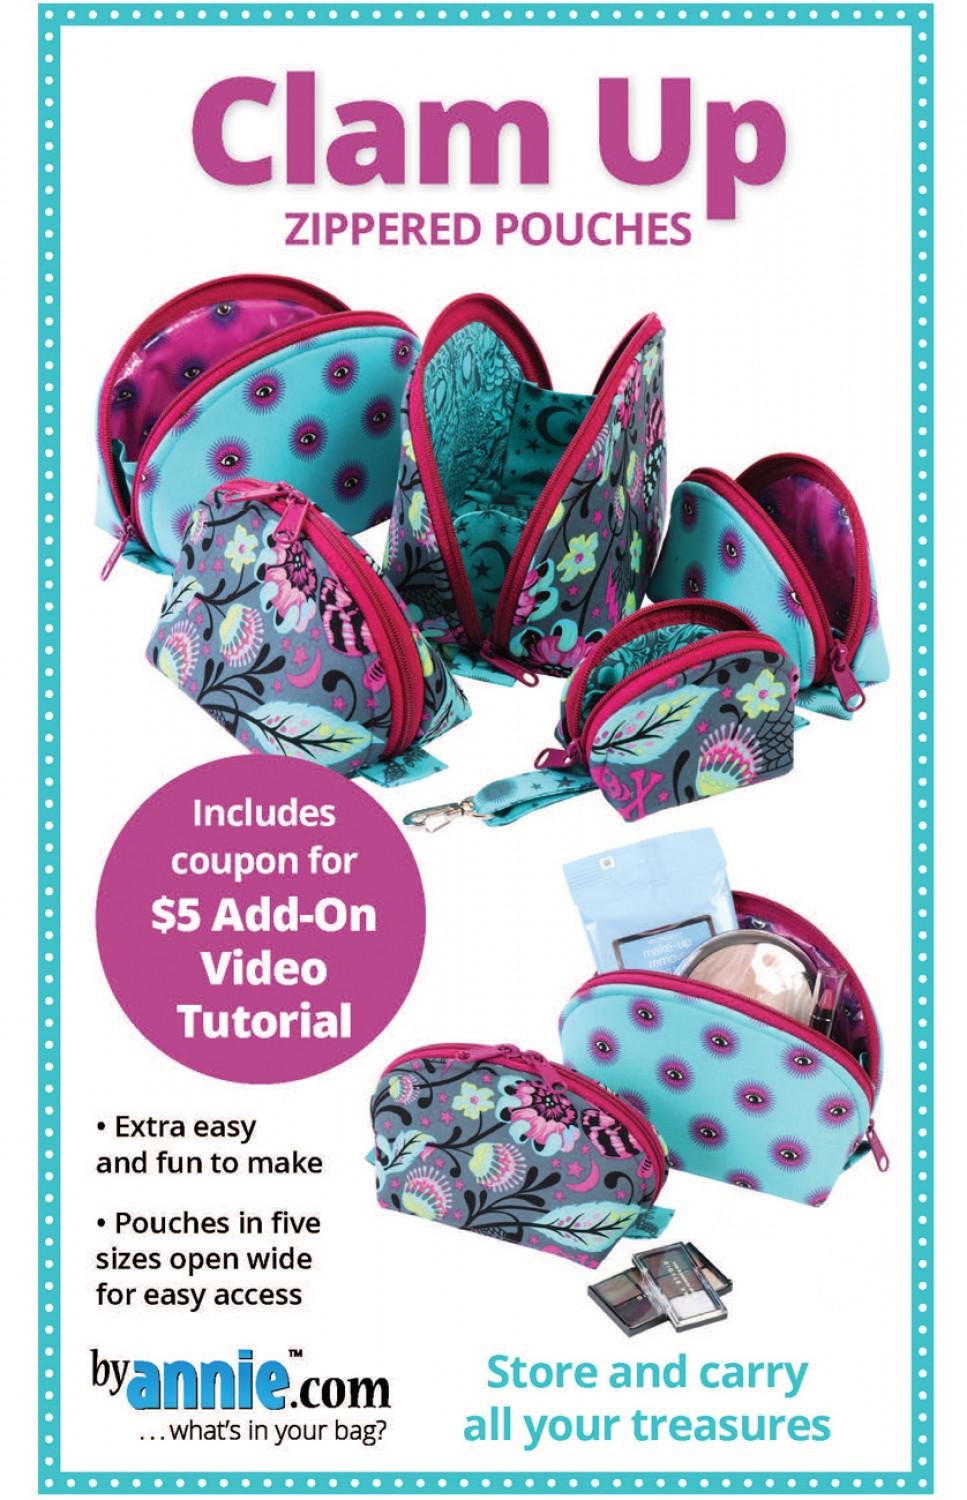 Clam Up Zippered Pouches Sewing Pattern by Annie Unrein for ByAnnie